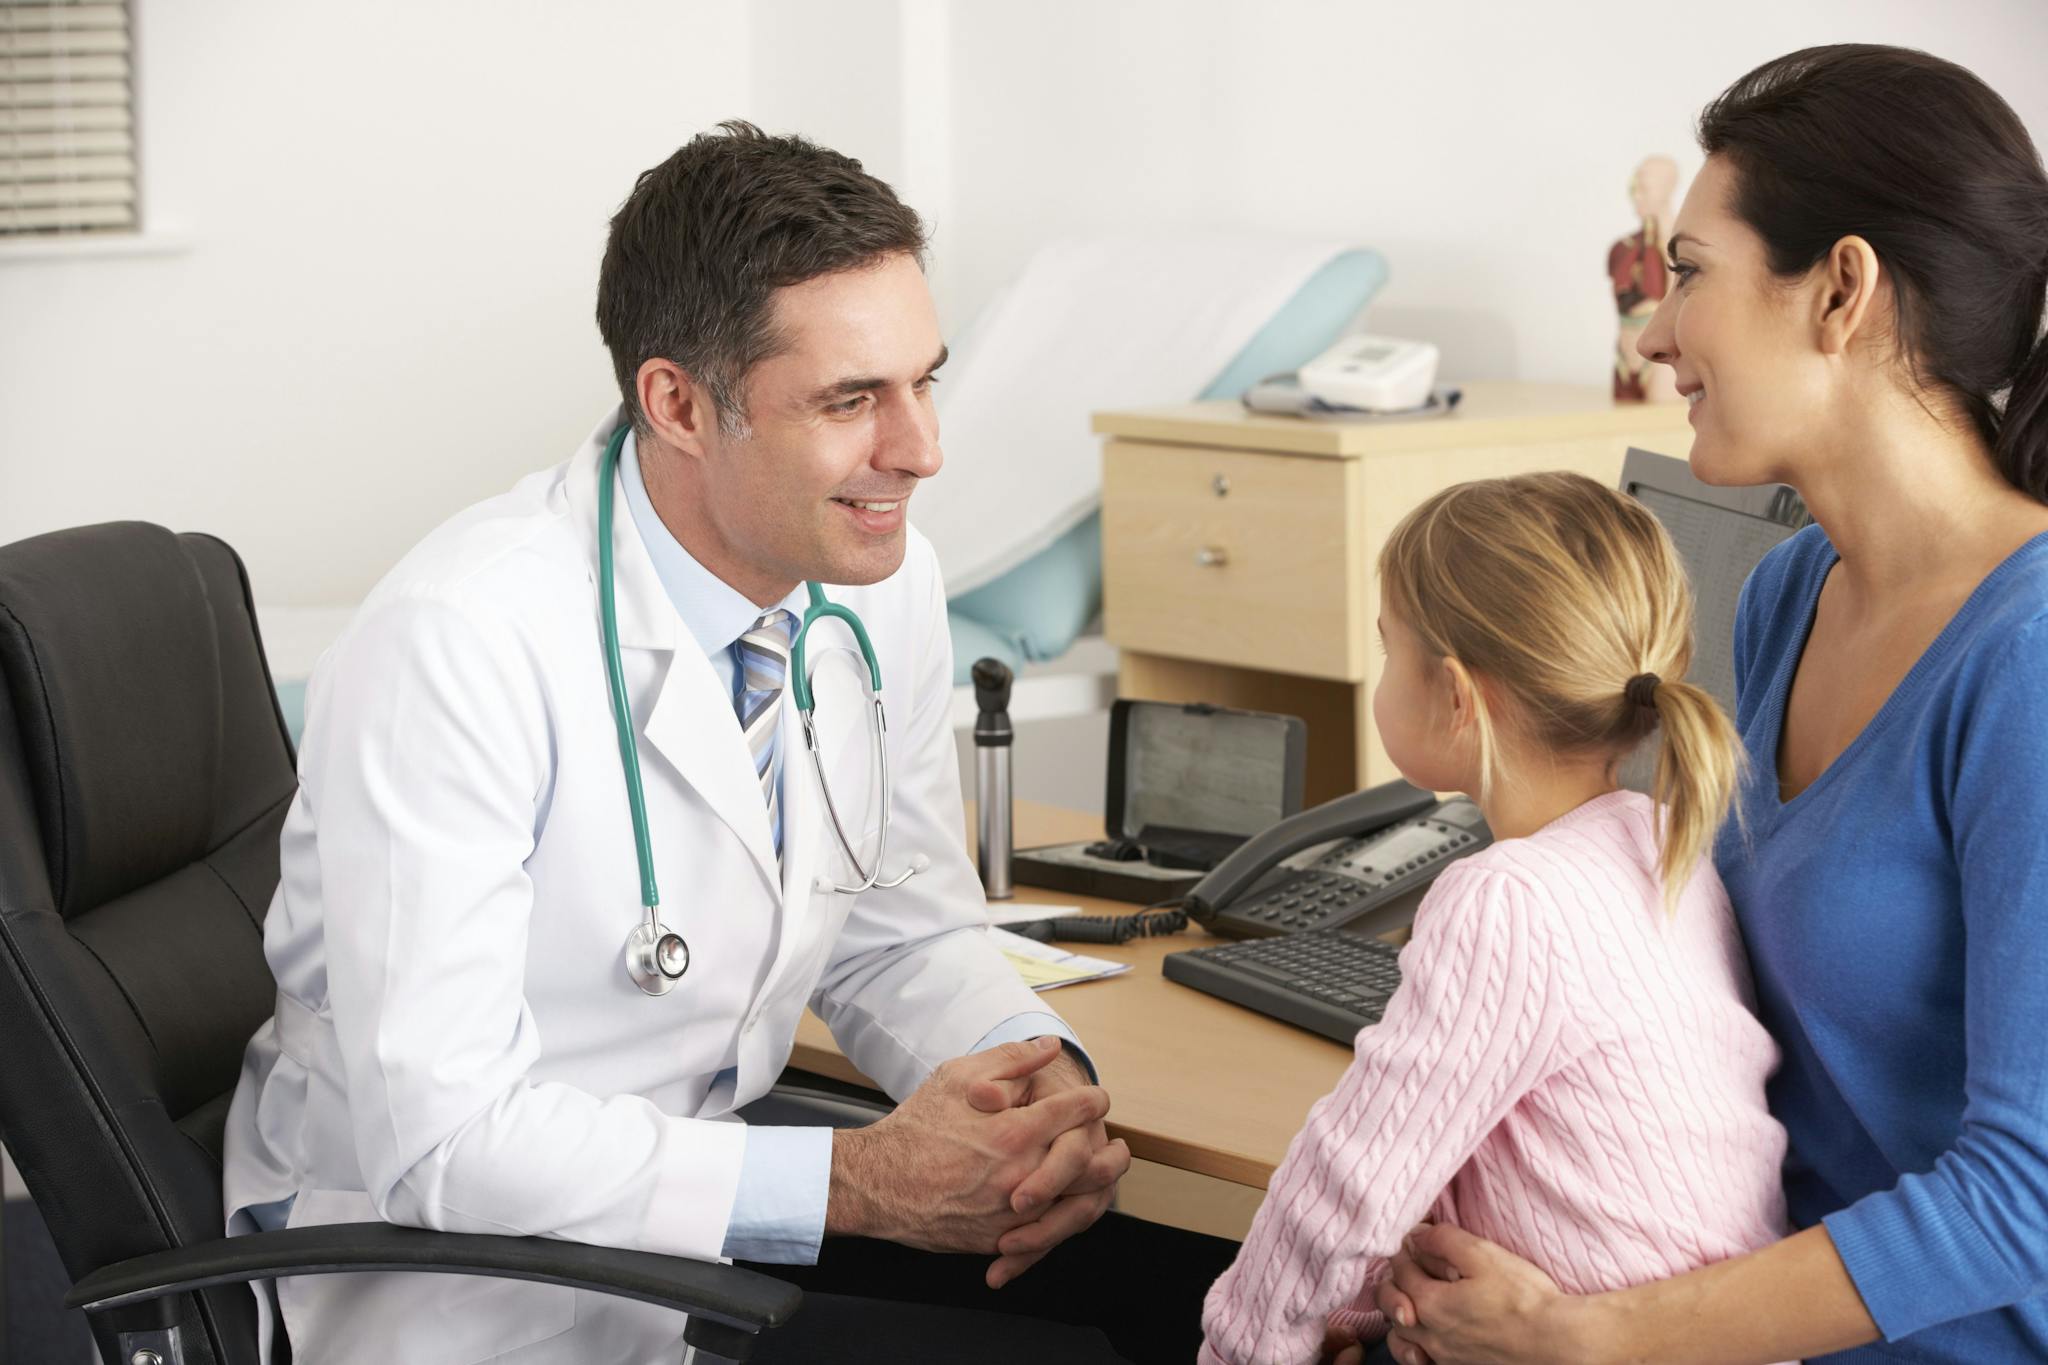 doctor talking to young child and mother